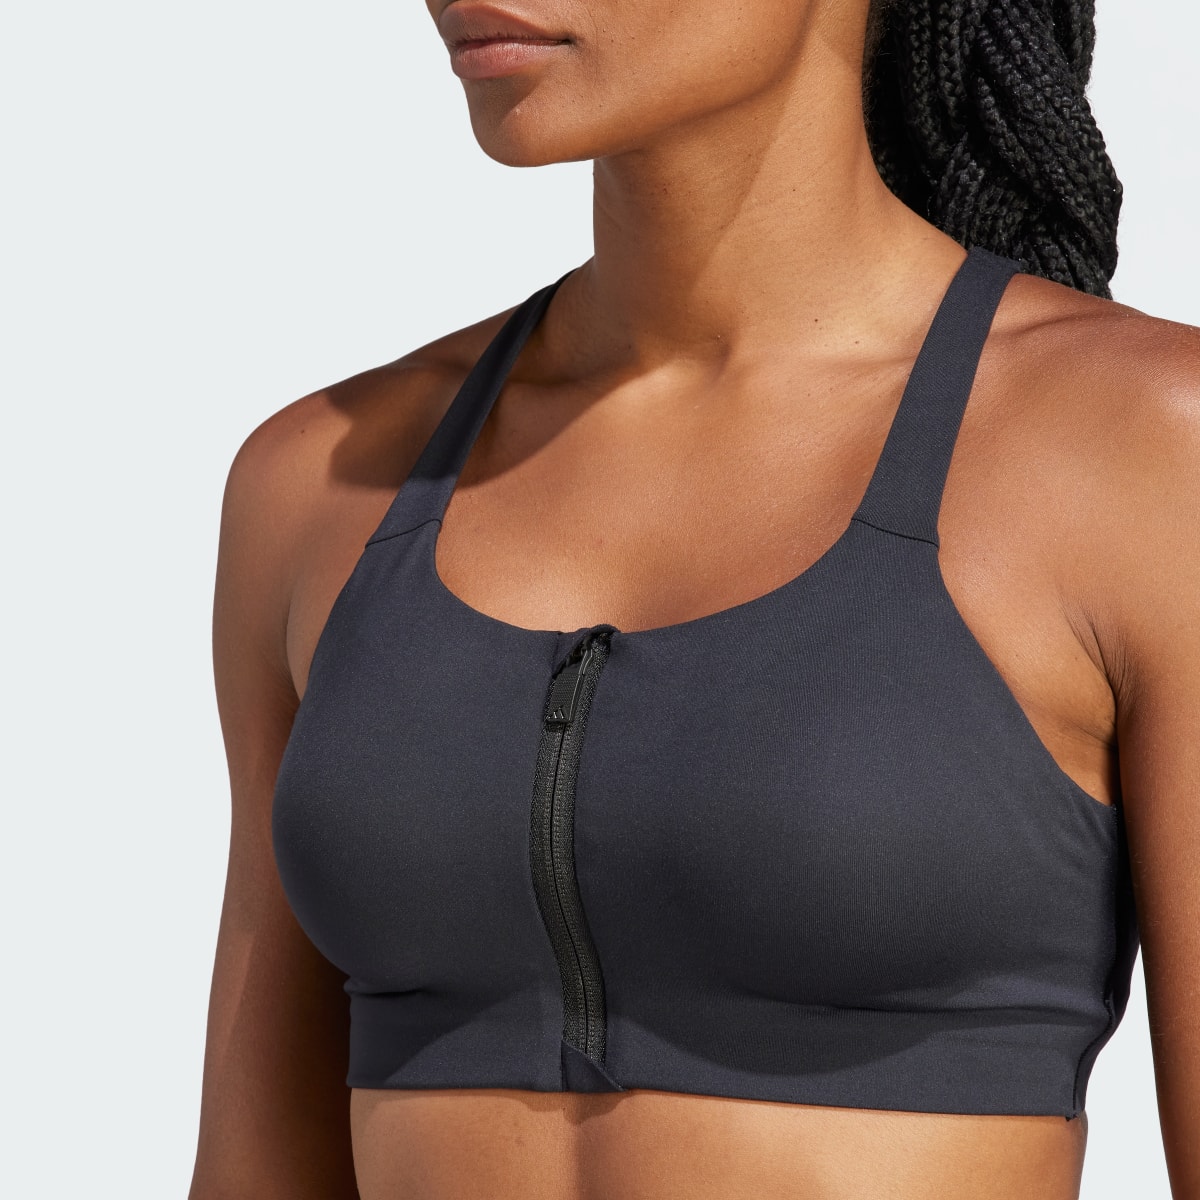 Adidas TLRD Impact Luxe High-Support Zip Bra. 8